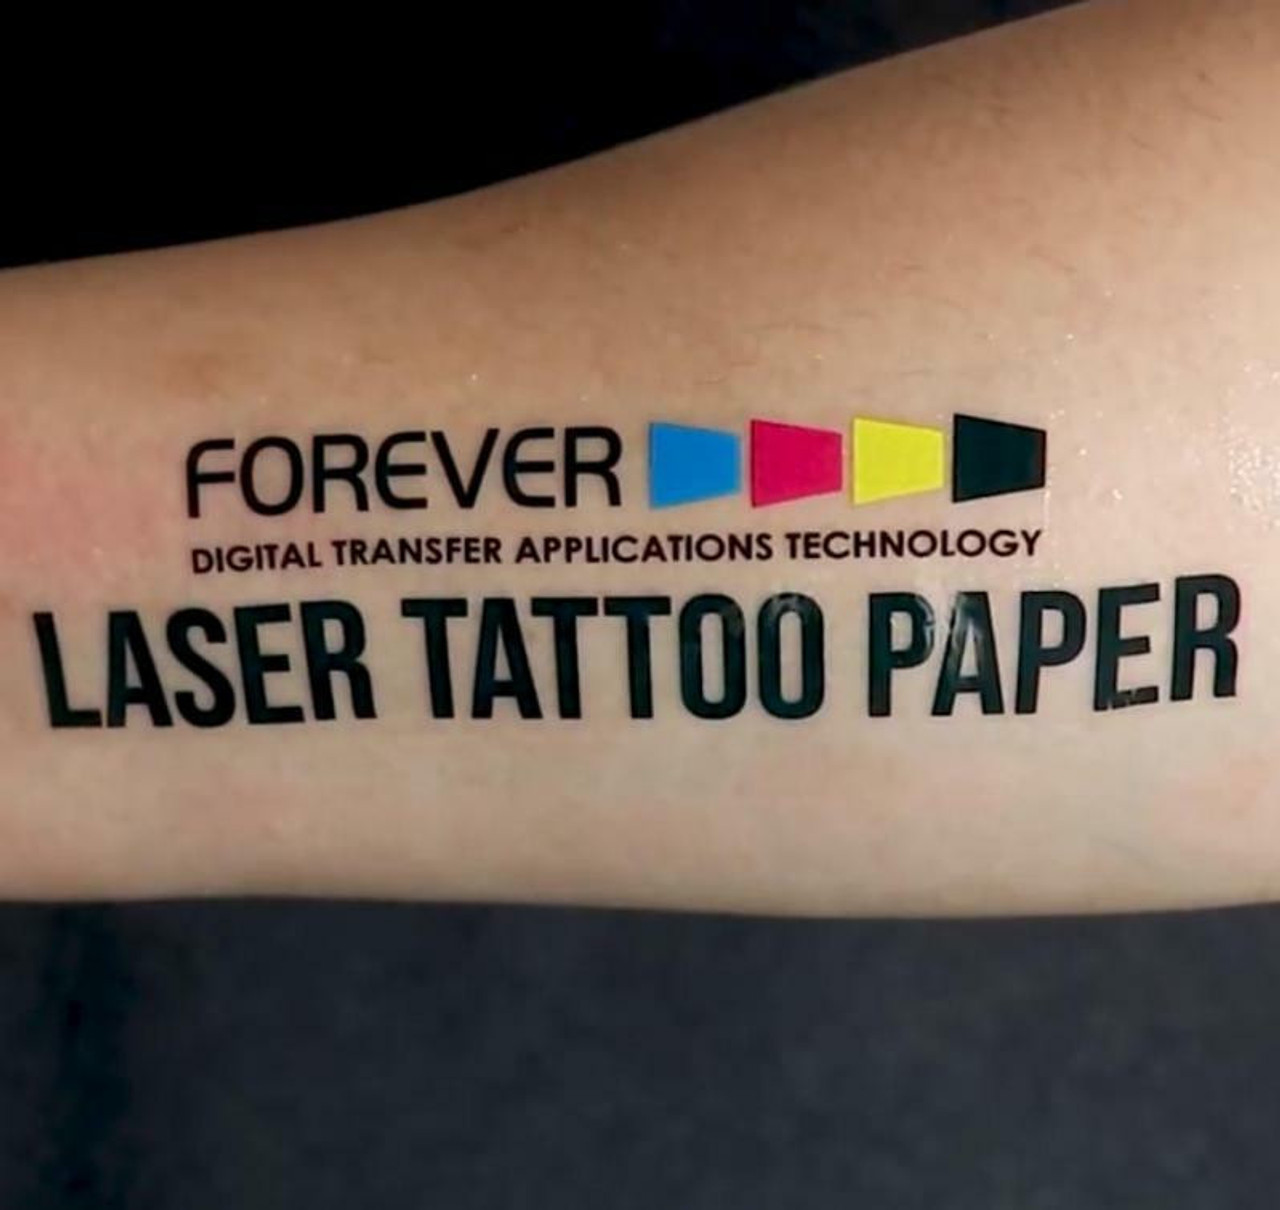 Amaya Sales UK - It's Friday- and time to celebrate with a little team  spirit! Check out our #teamamaya tattoo's using OKI UK & Ireland and FOREVER  GmbH - Transfer Paper Laser